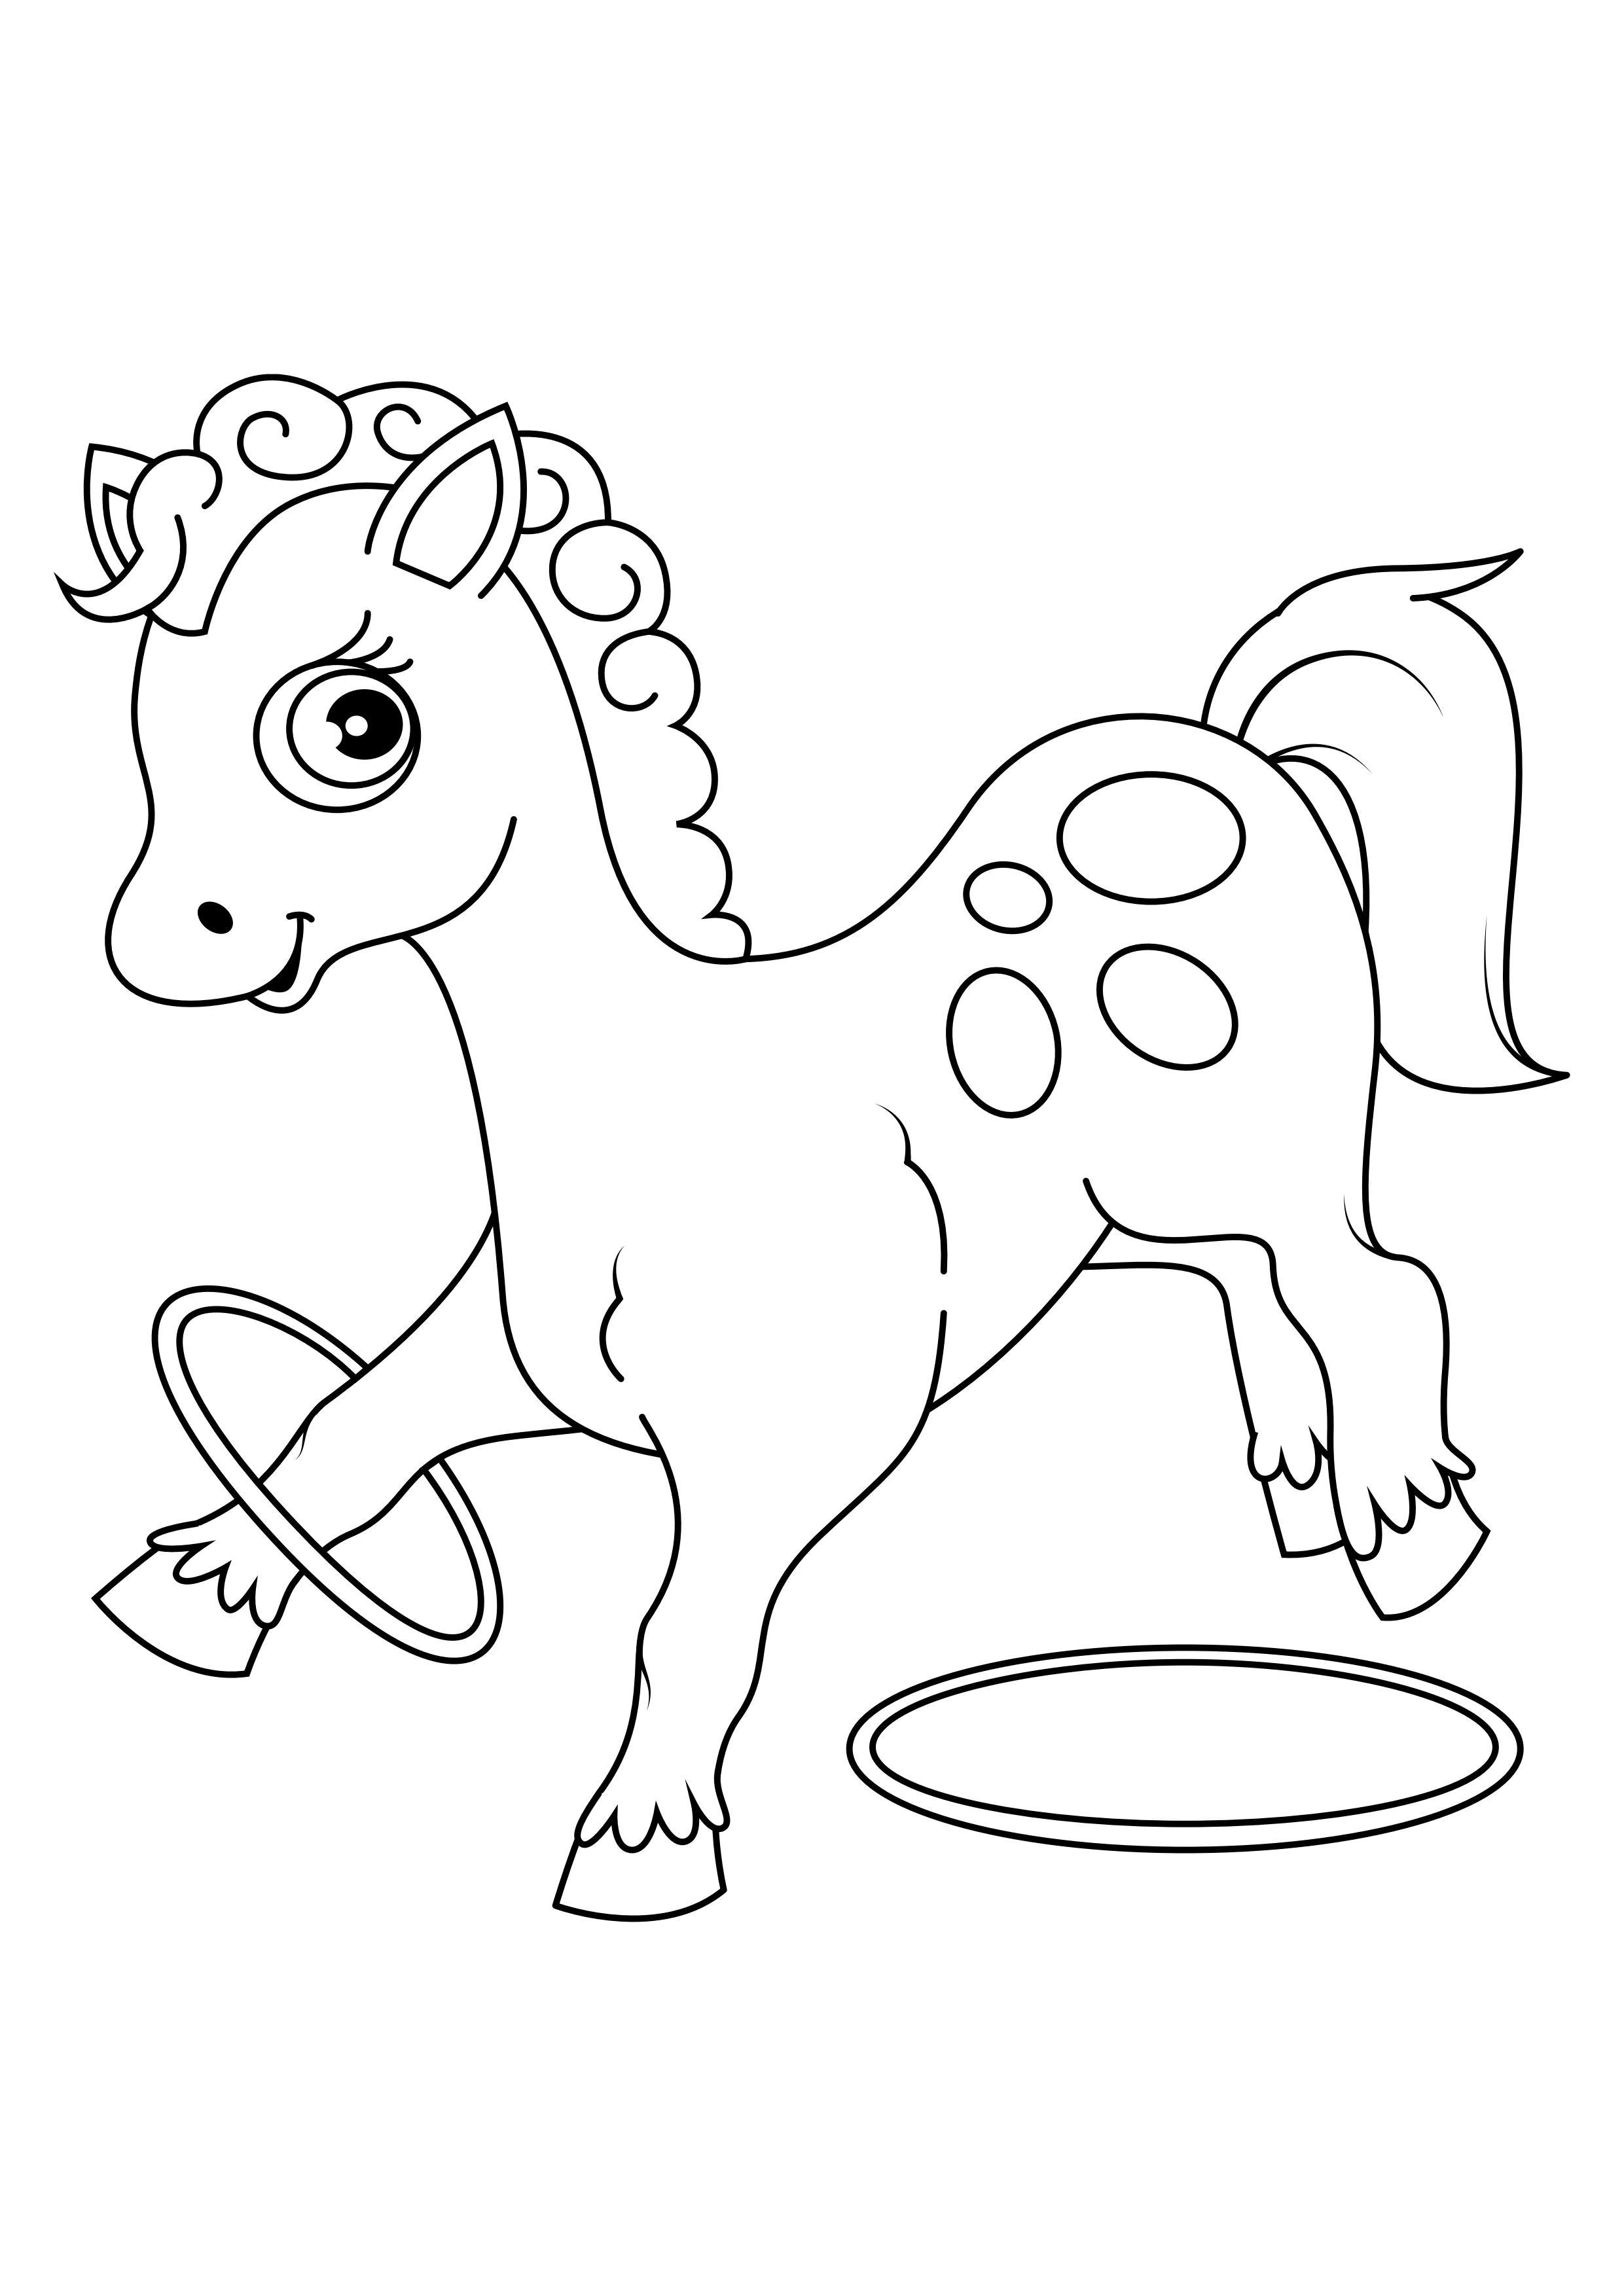 Coloring page horse with hoops